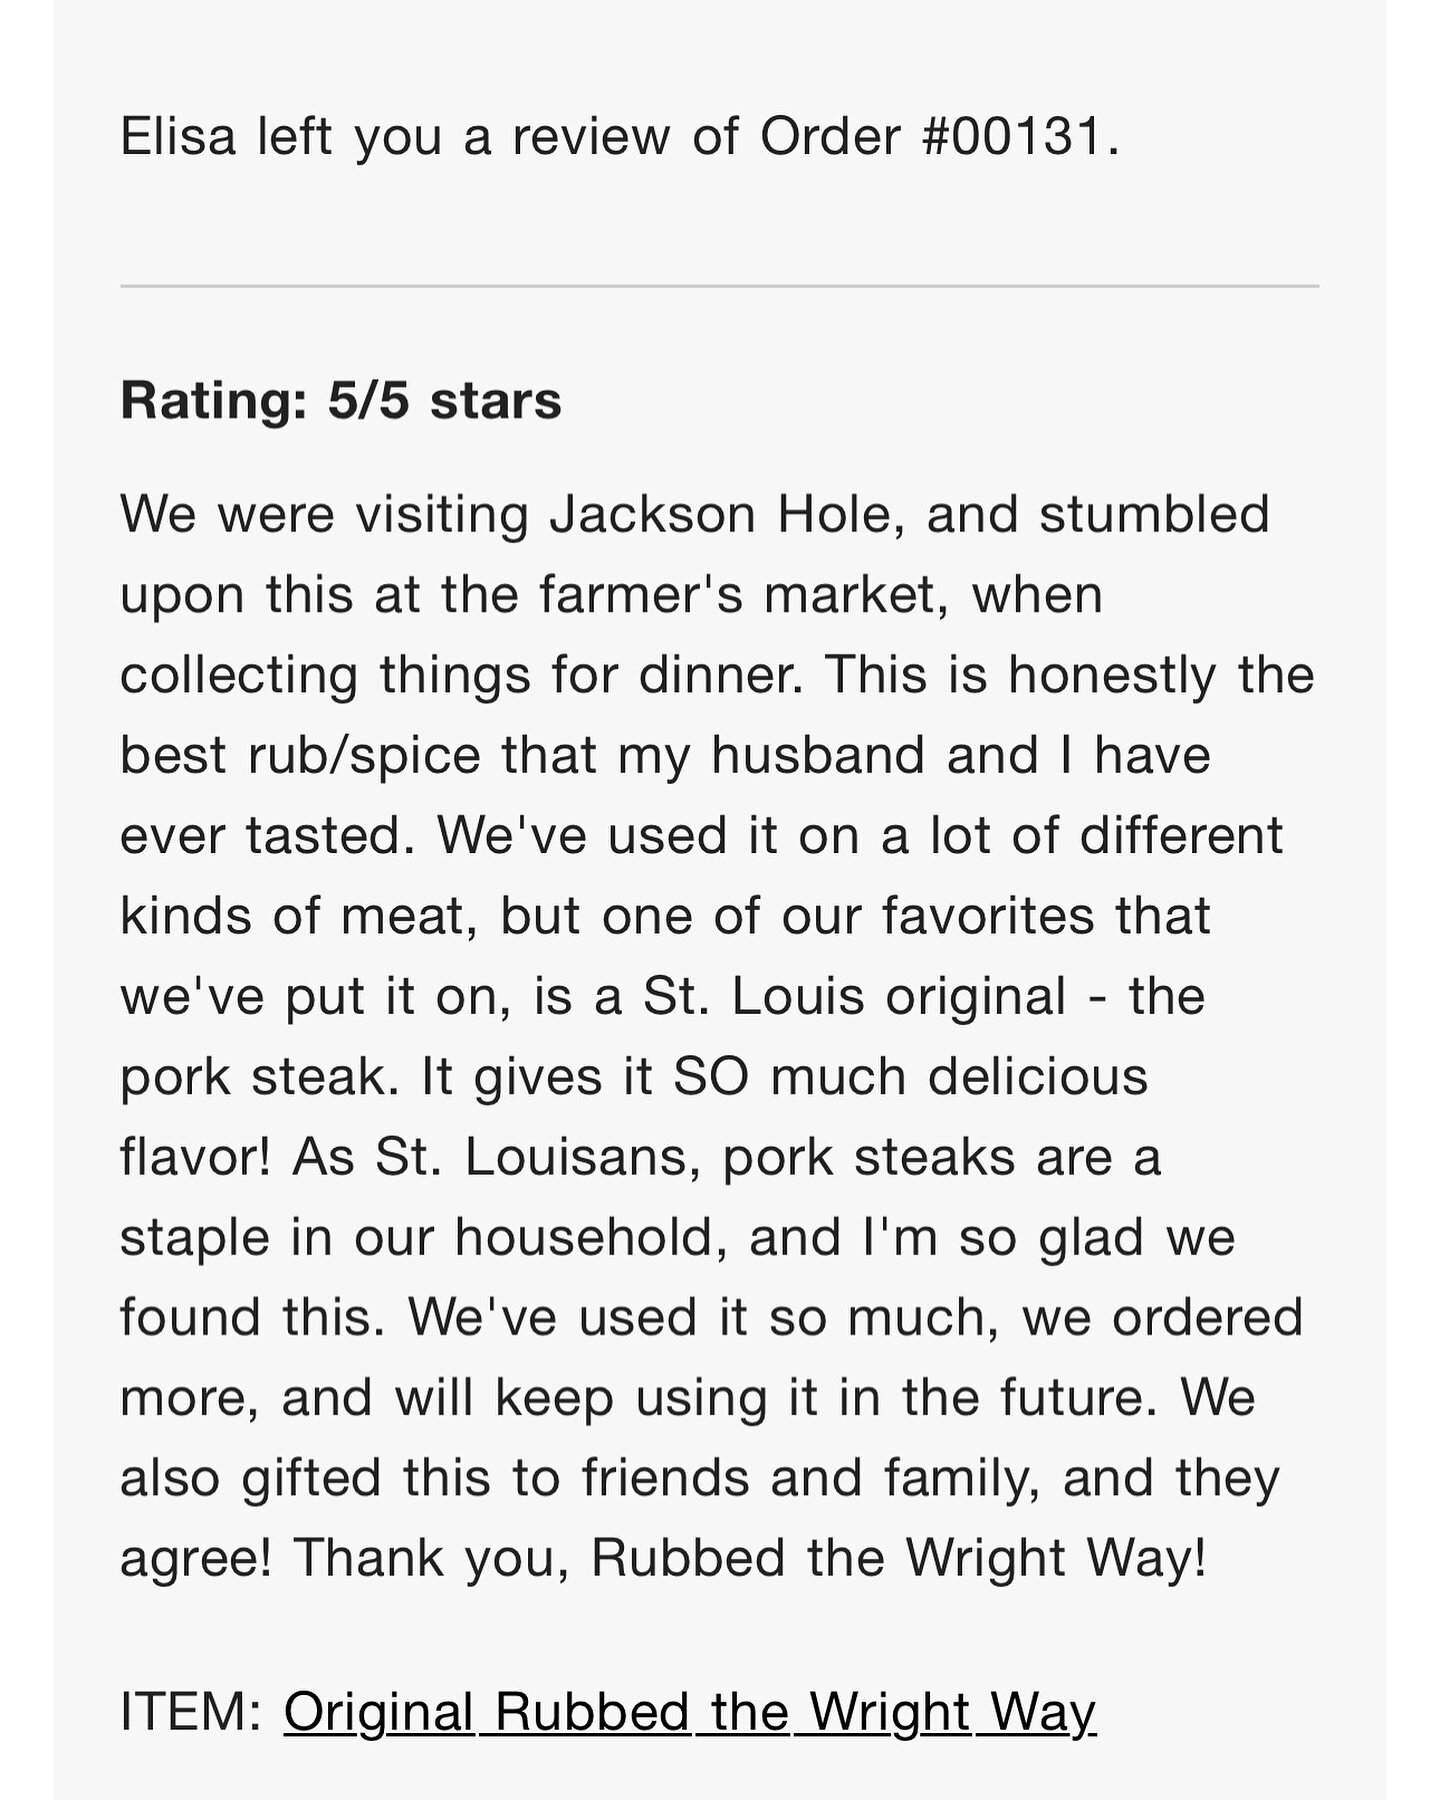 It&rsquo;s reviews like this that make all the hours I&rsquo;ve spent covered in paprika dust and sticky with brown sugar absolutely worth it. Thank you to Elisa and all of you who have given Rubbed the Wright Way a try and come back for more. ❤️❤️❤️